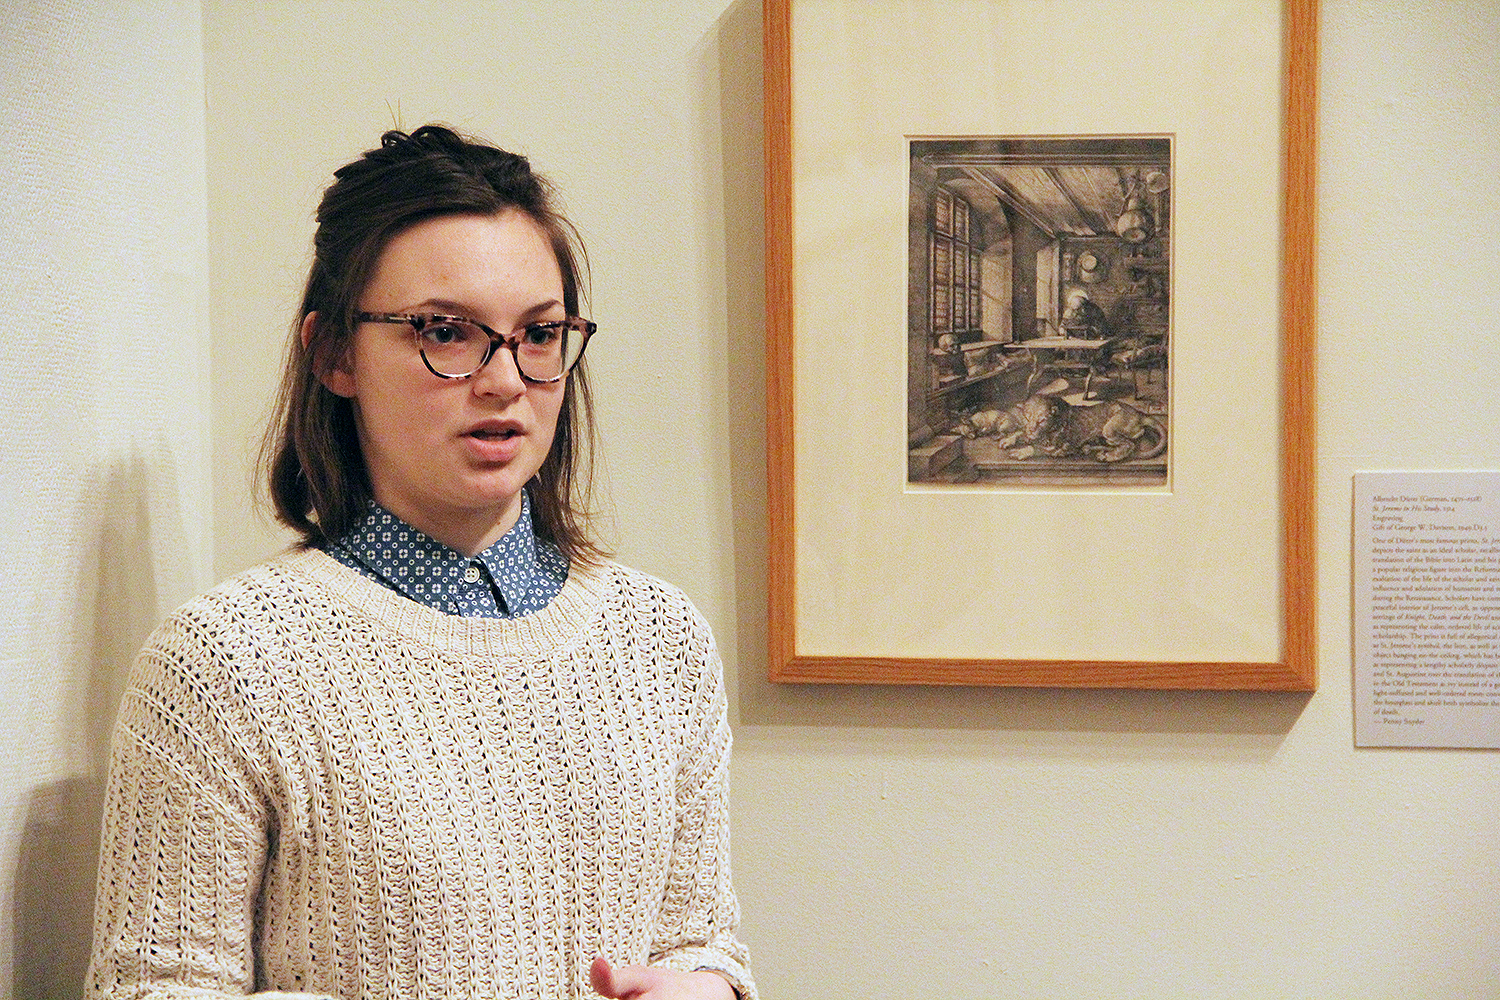 Penny Snyder '16 spoke about Albrecht Dürer's "St. Jerome in his Study," 1514, one of the "Meisterstiche" or "master engravings."